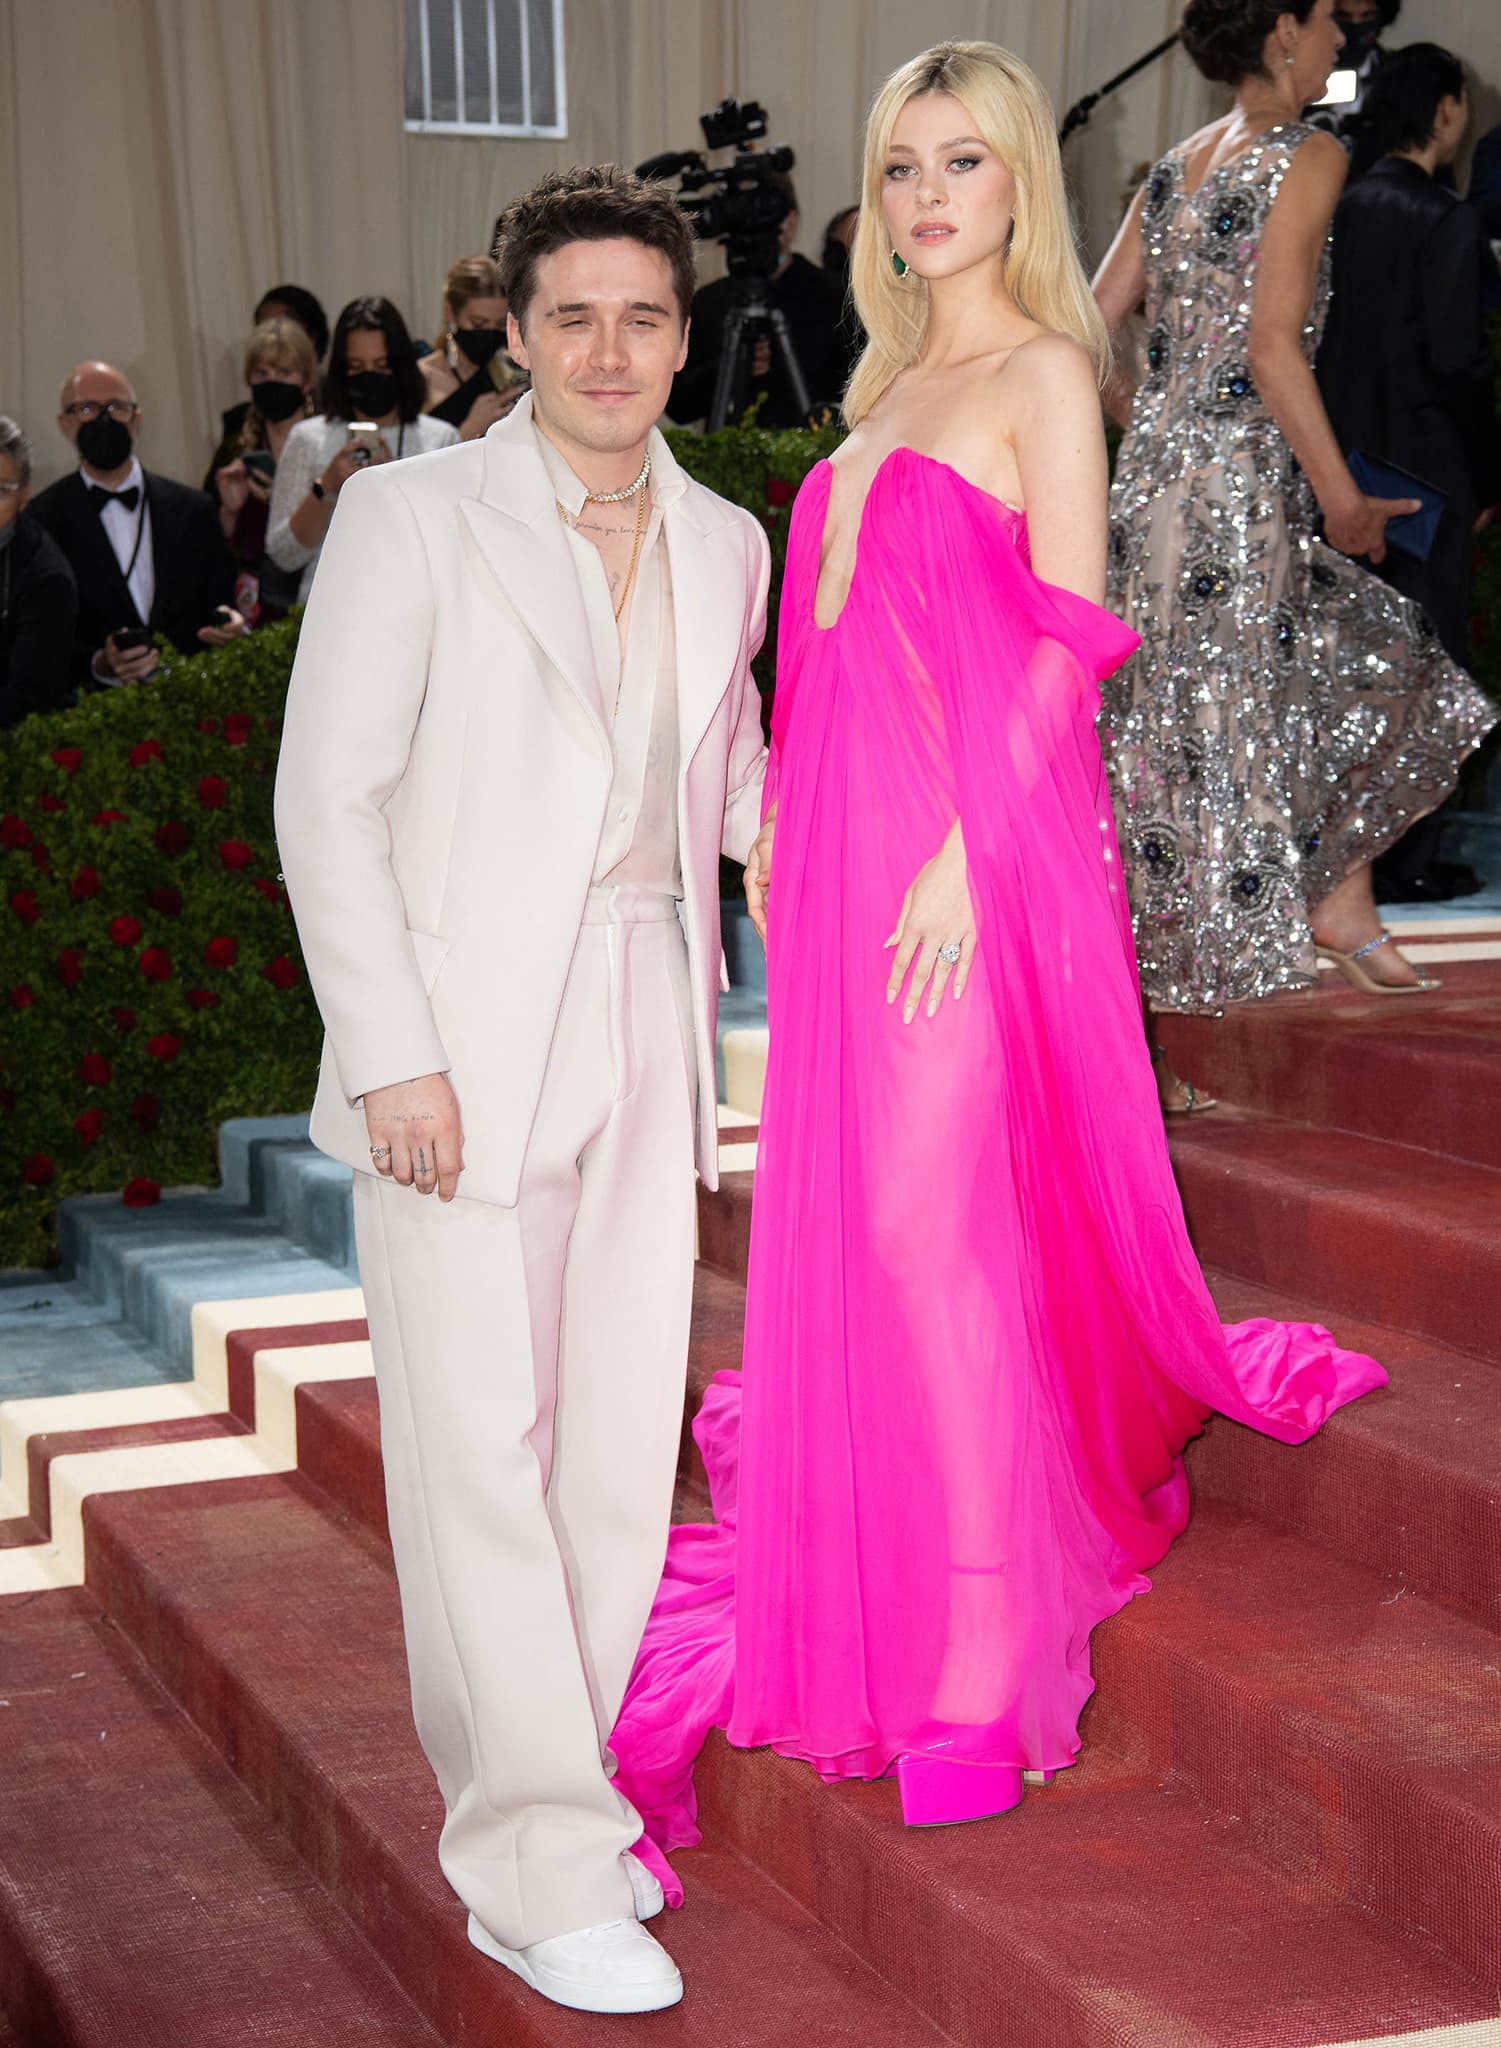 Brooklyn Beckham and wife Nicola Peltz arrive at the 2022 Met Gala in Valentino outfits